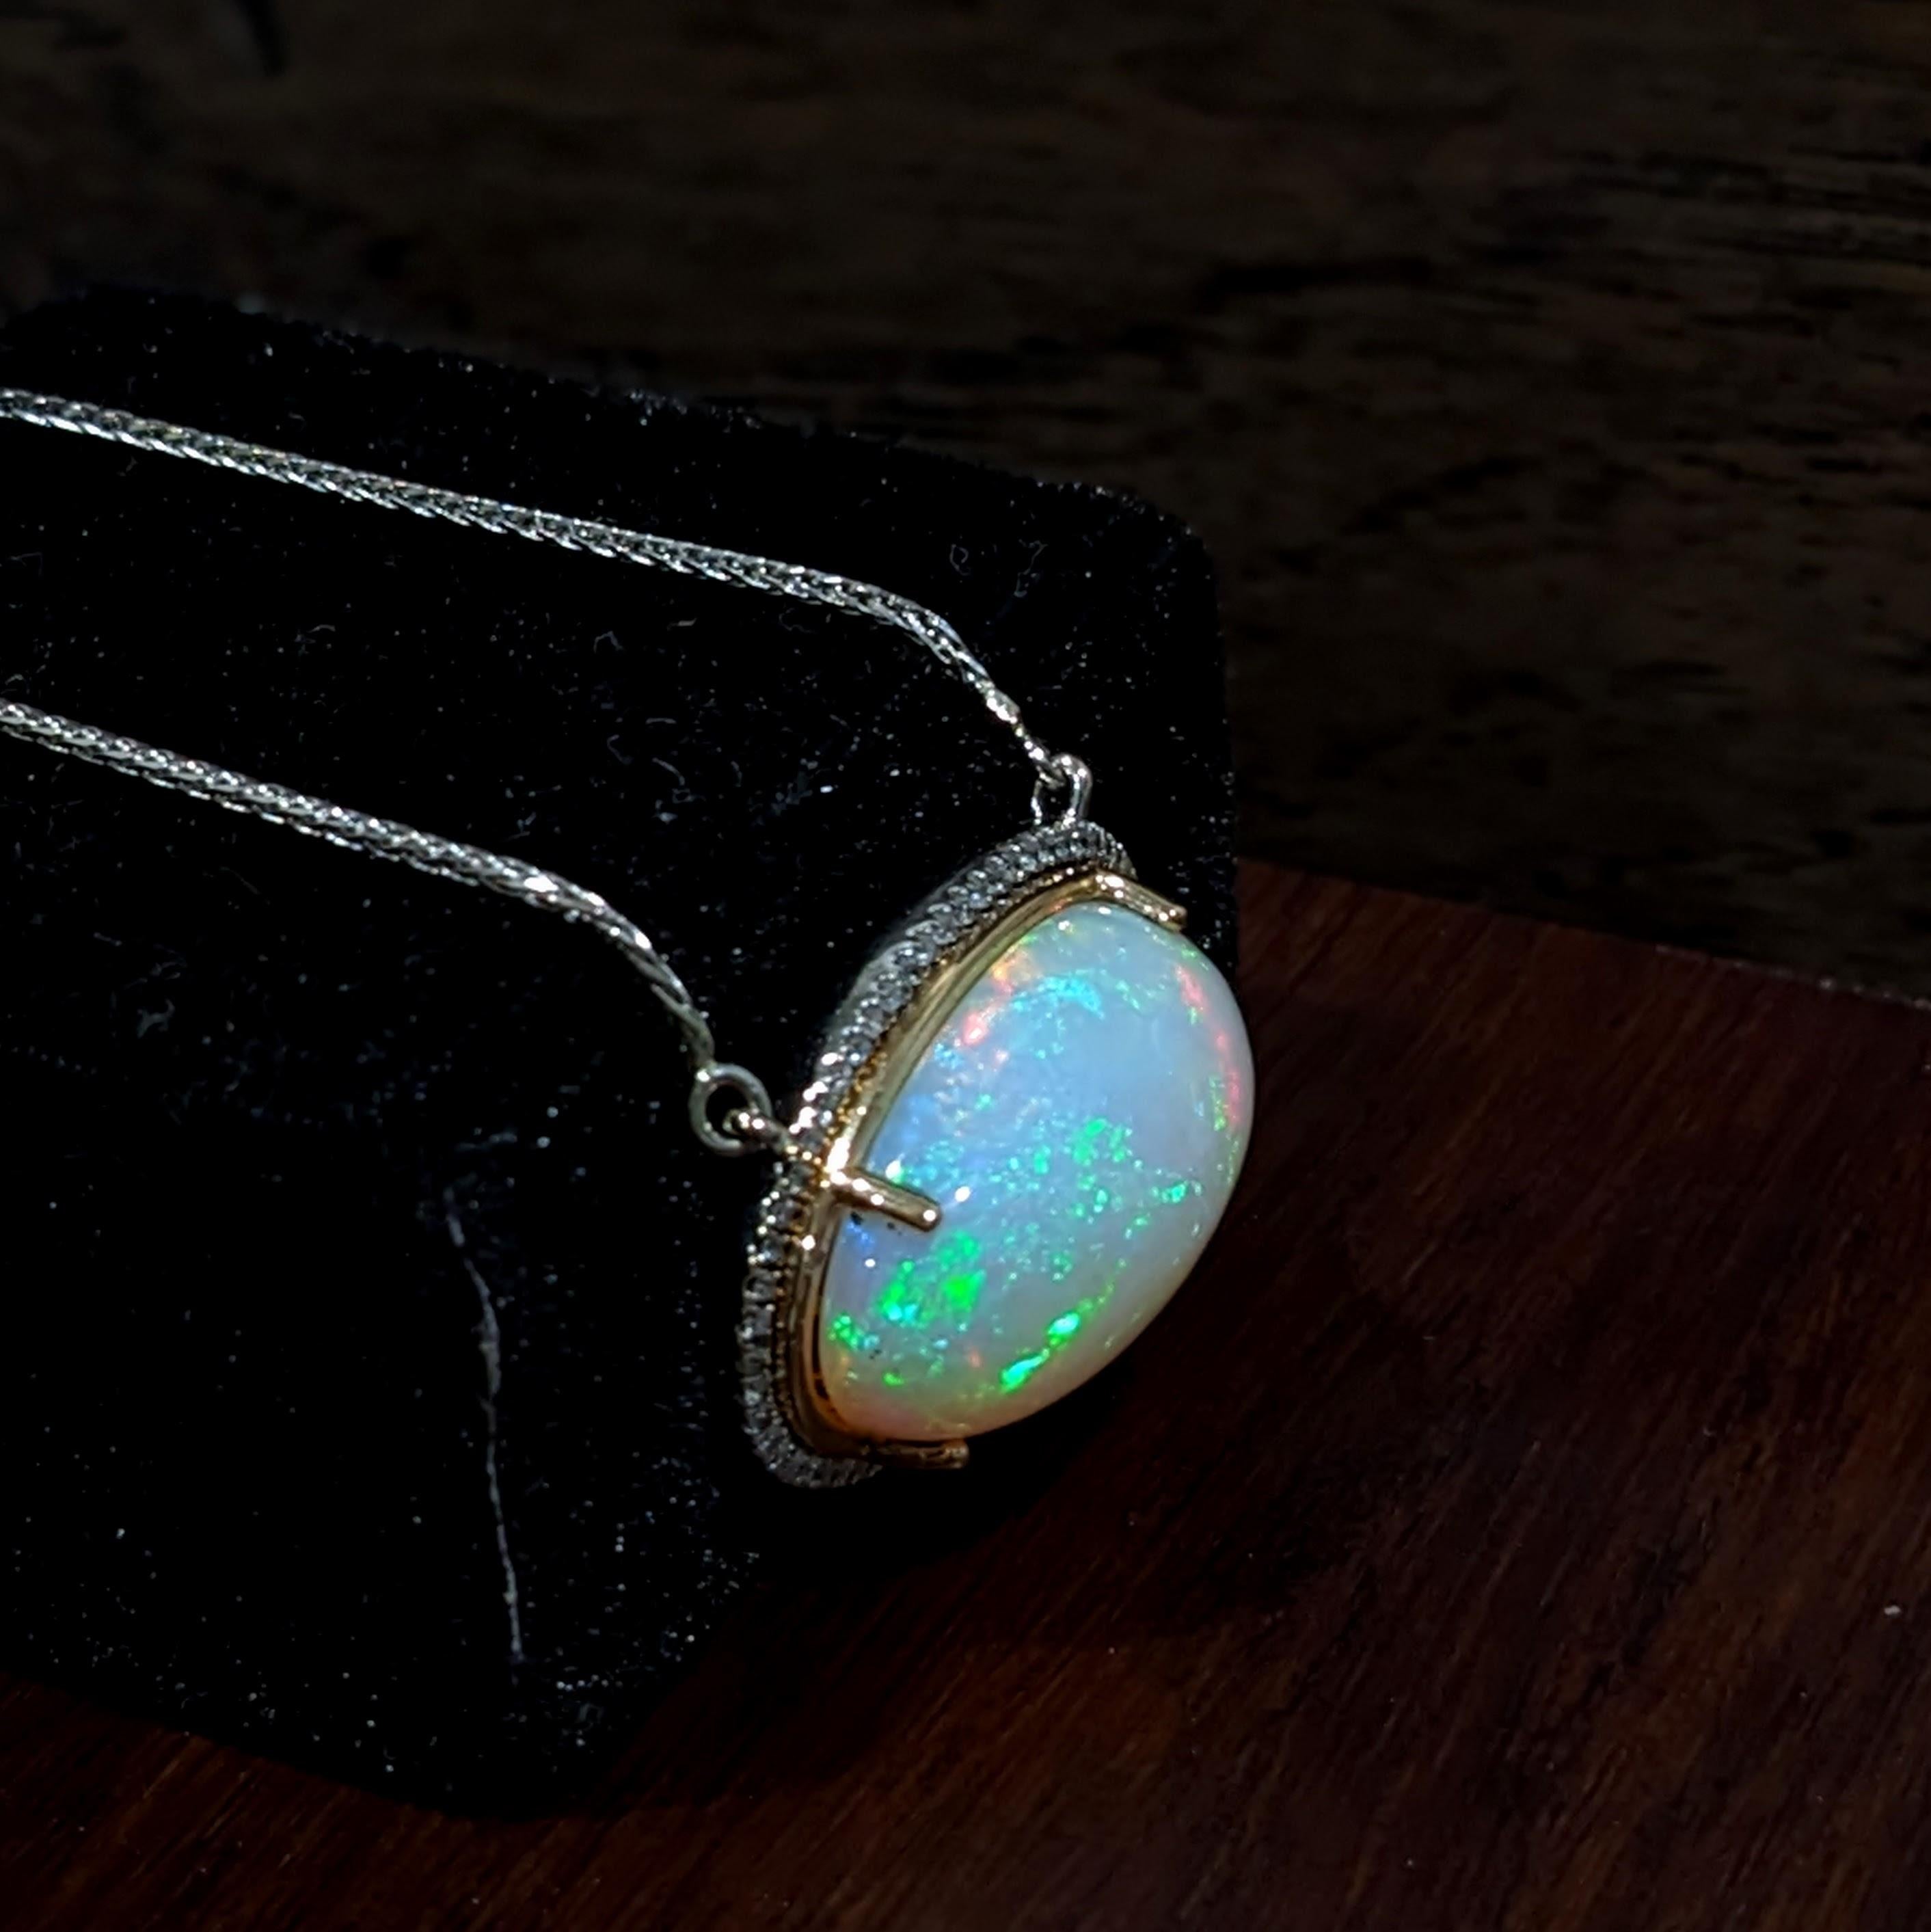 4.02ct Opal Pendant w Diamond Accents in 14K Dual Tone Gold Oval 23x14mm 1